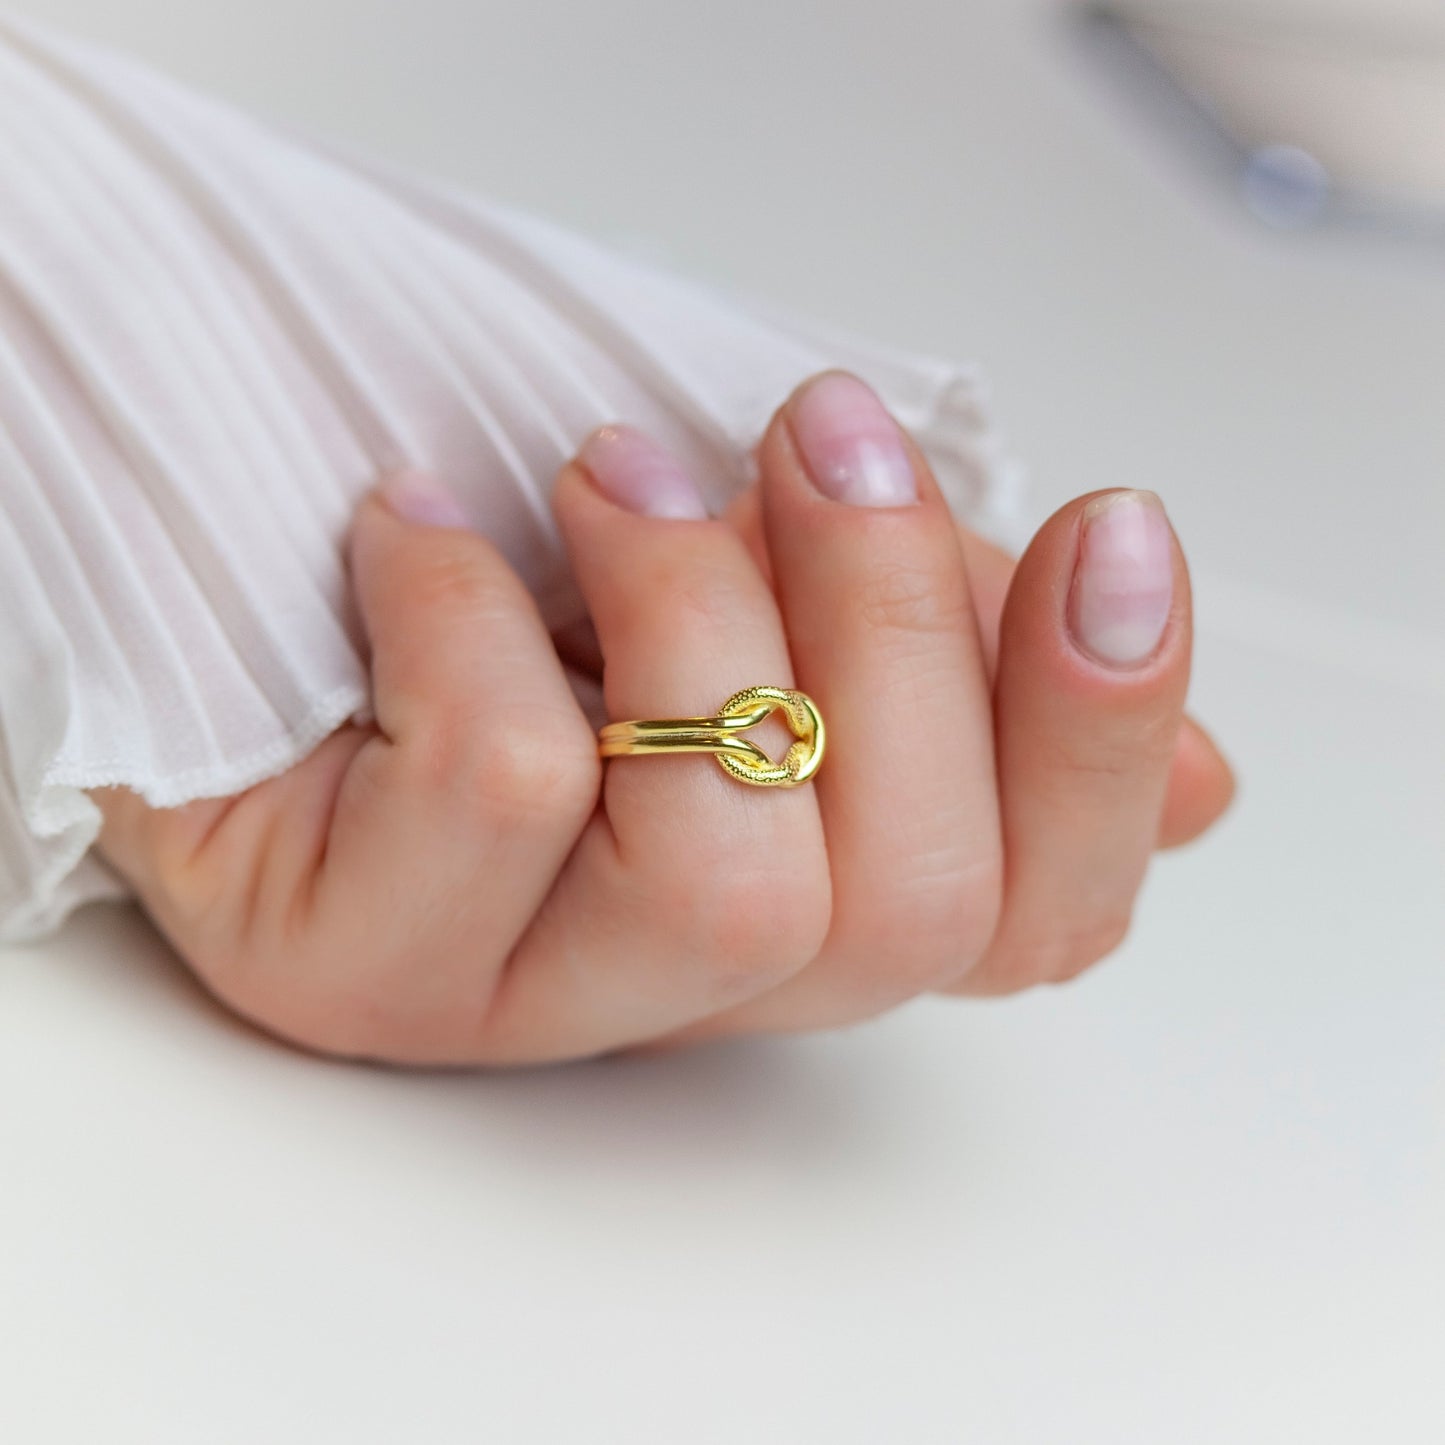 Knot Gold Ring on a woman's finger